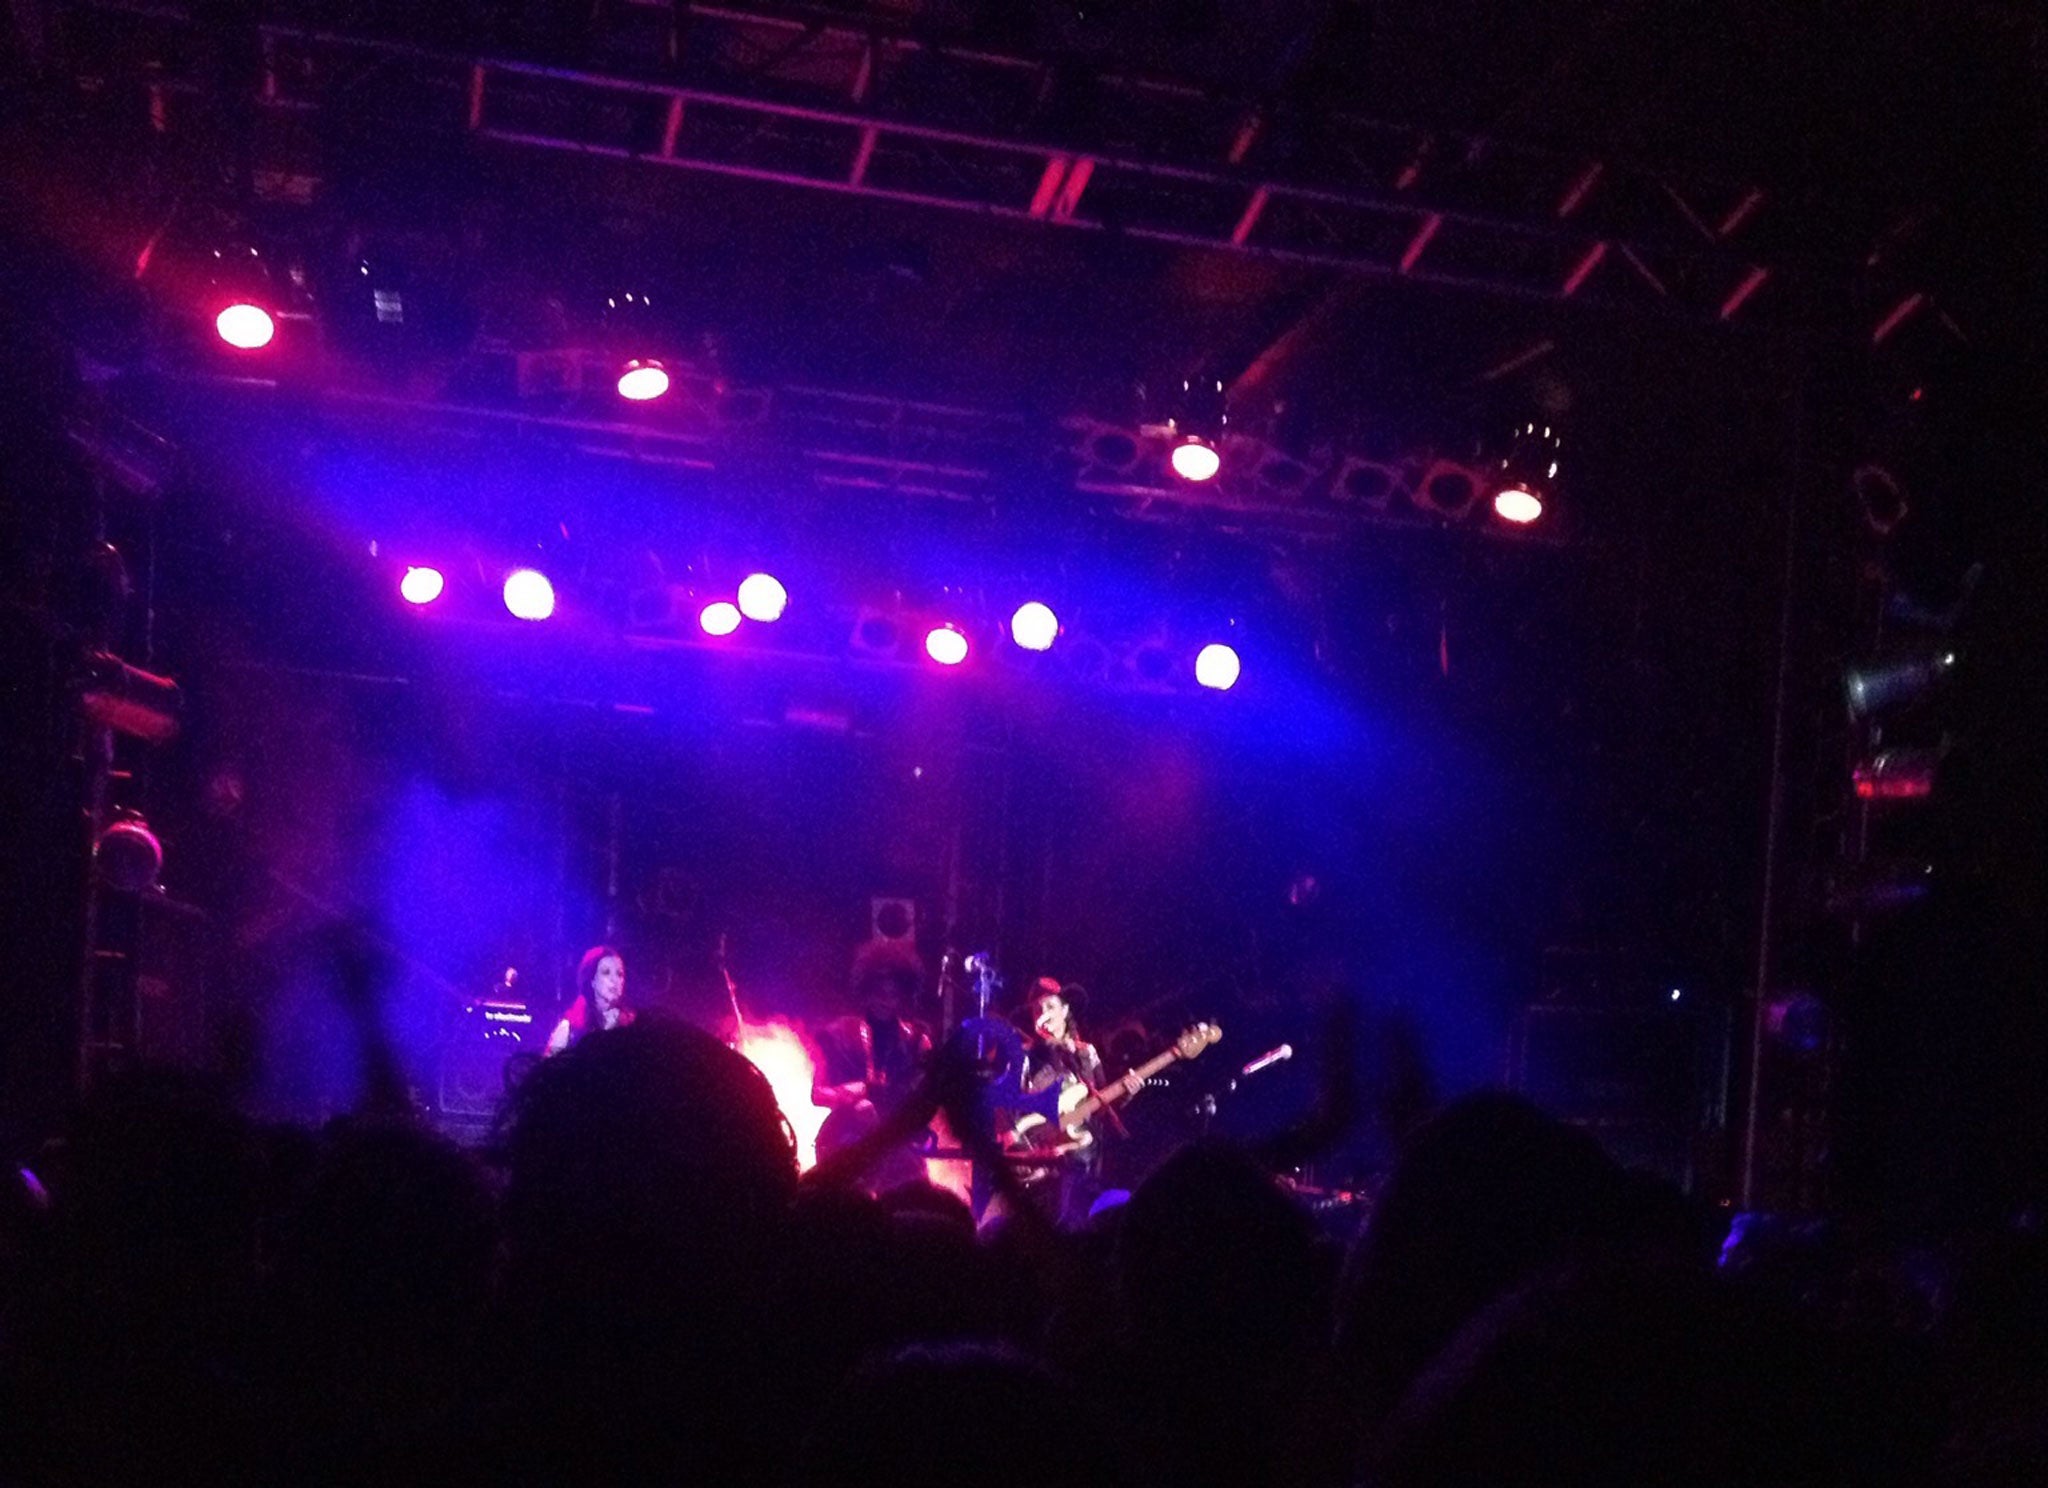 American singer Prince on stage at the Electric Ballroom in Camden, north London for a secret gig